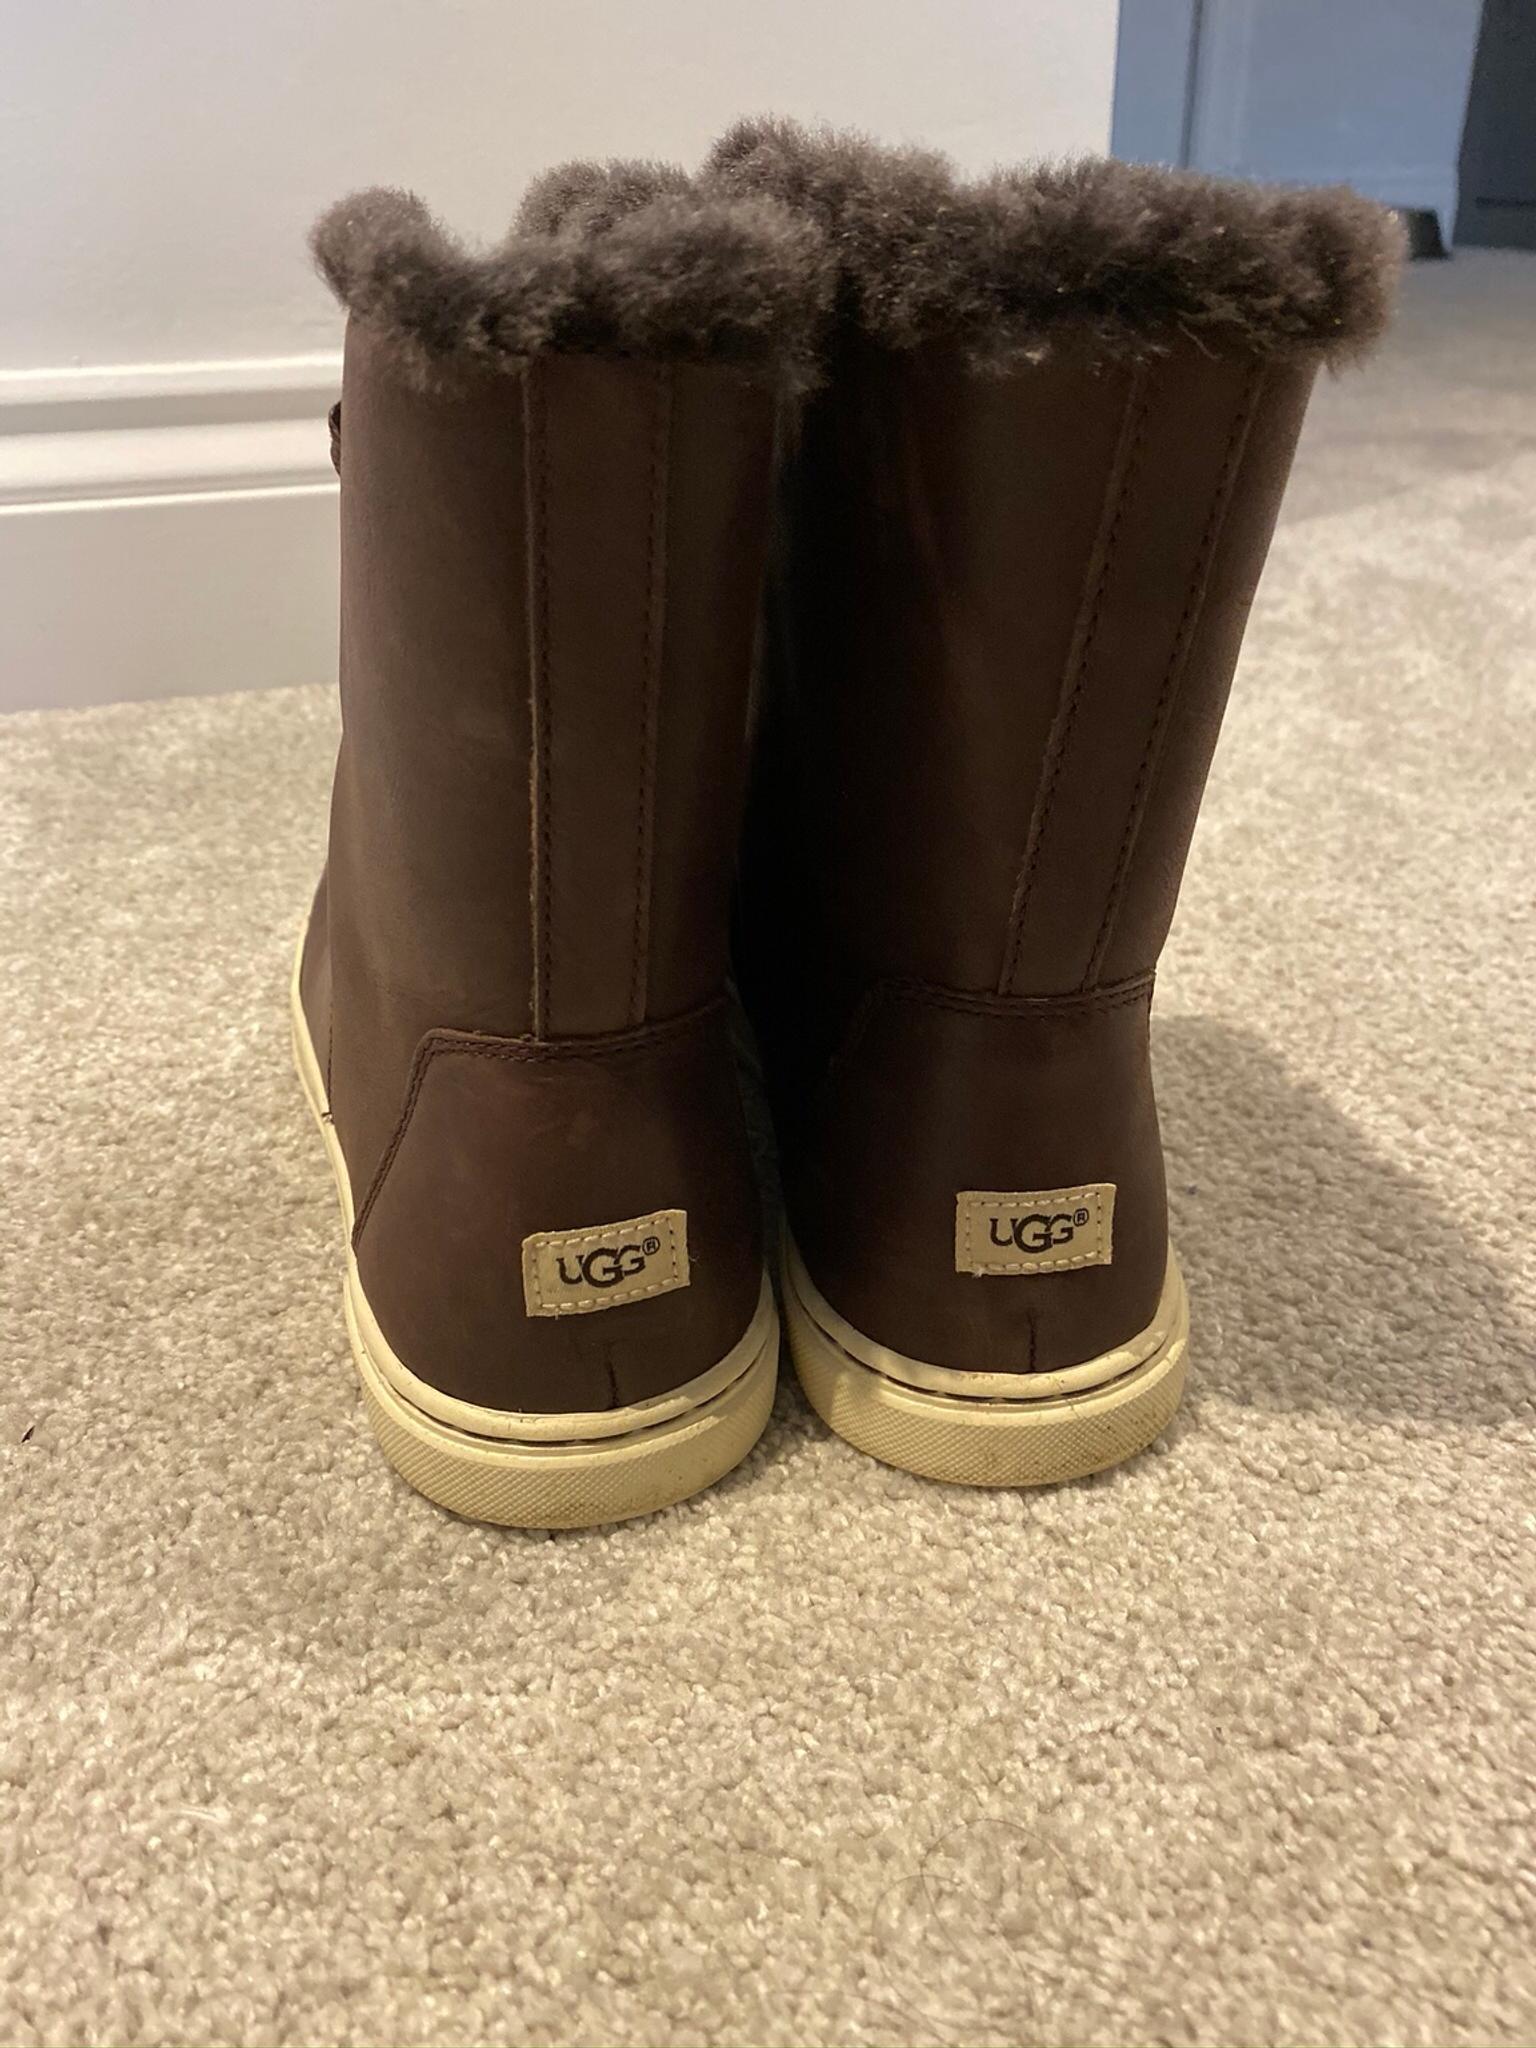 cheap real ugg boots uk sale